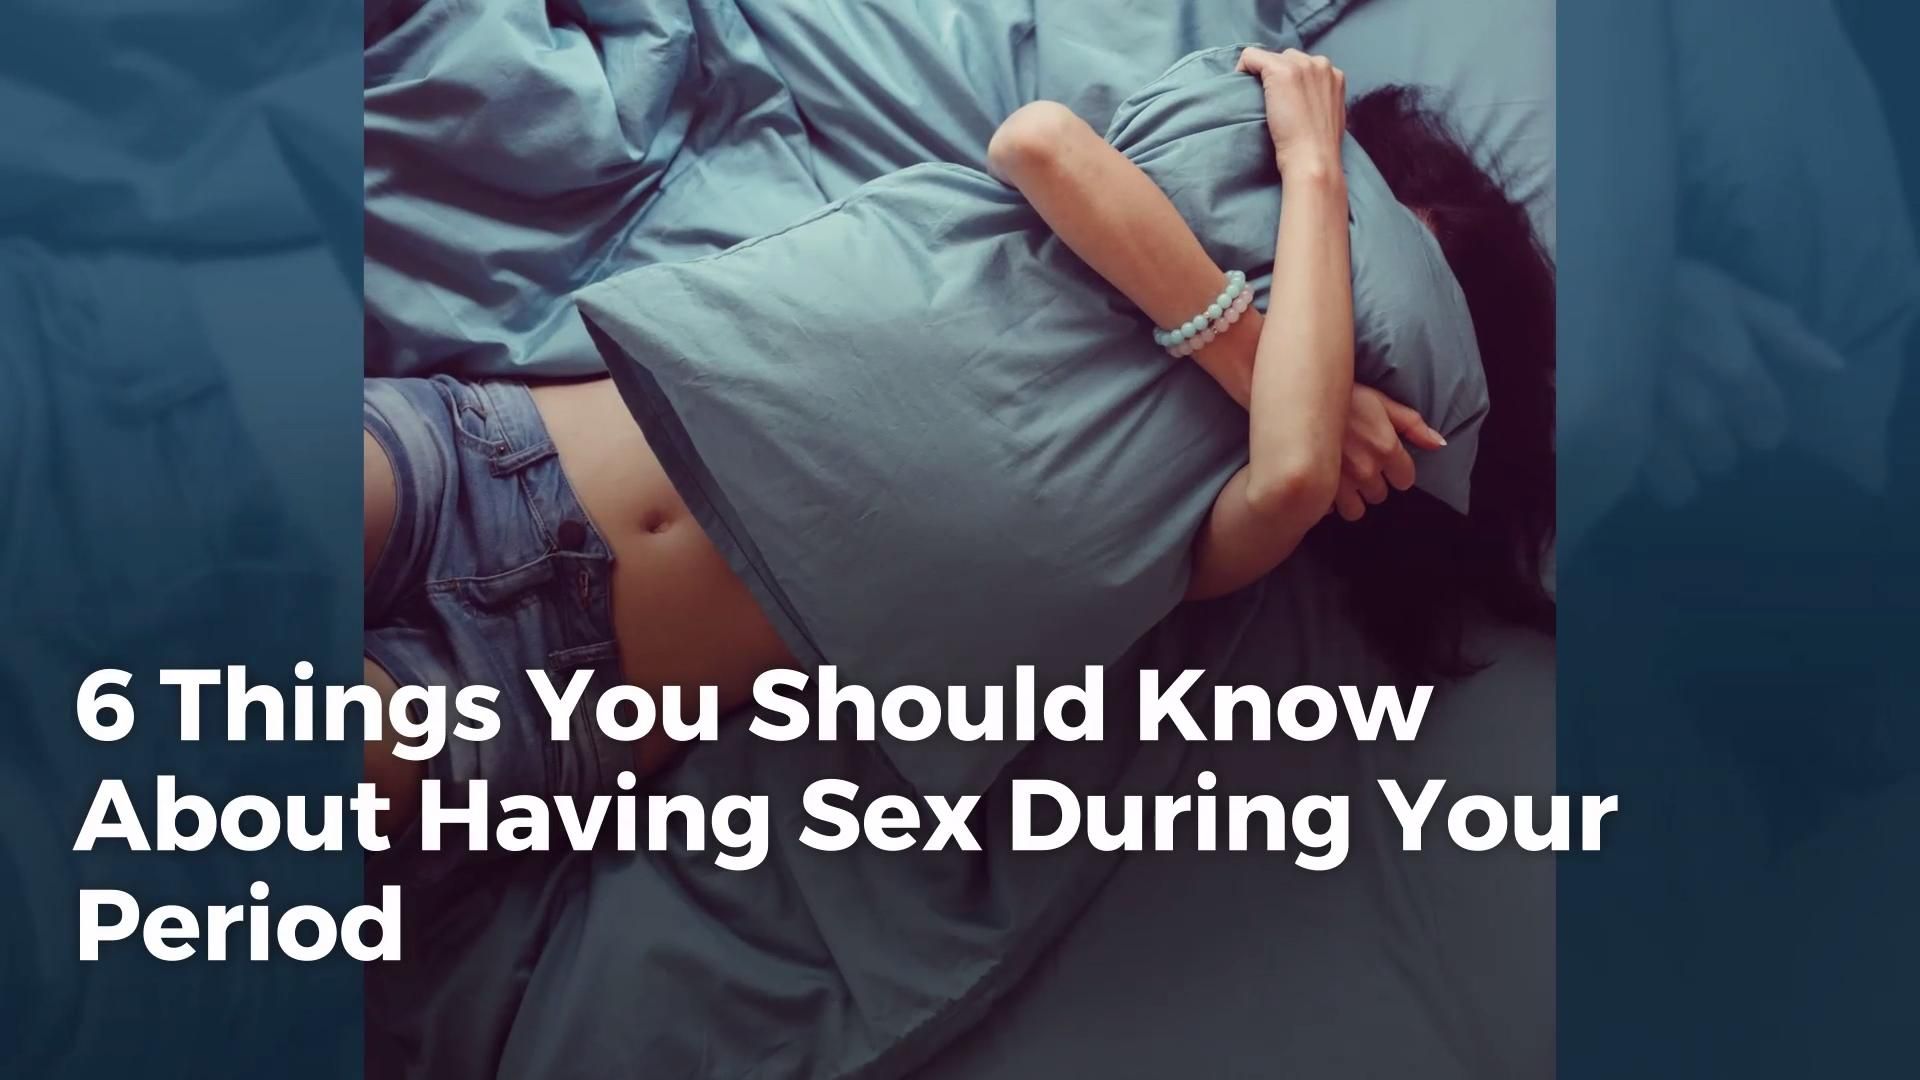 Period Oral Sex - 11 Period Sex Tips - How To Have Sex While On Your Period